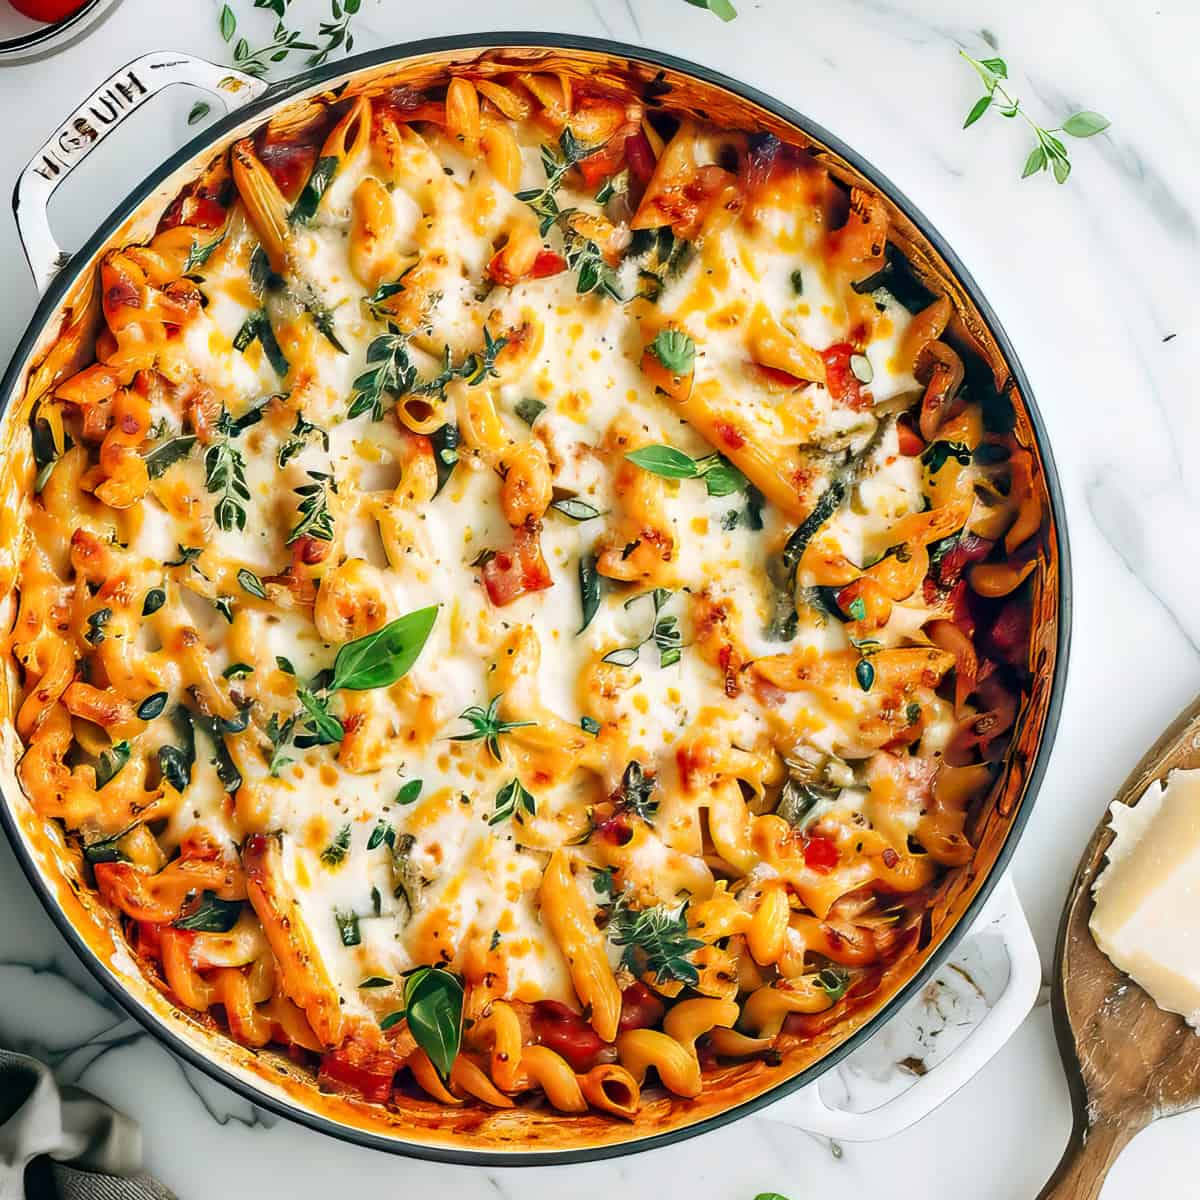 Vegetable pasta bake with penne in a casserole dish with baked cheese.